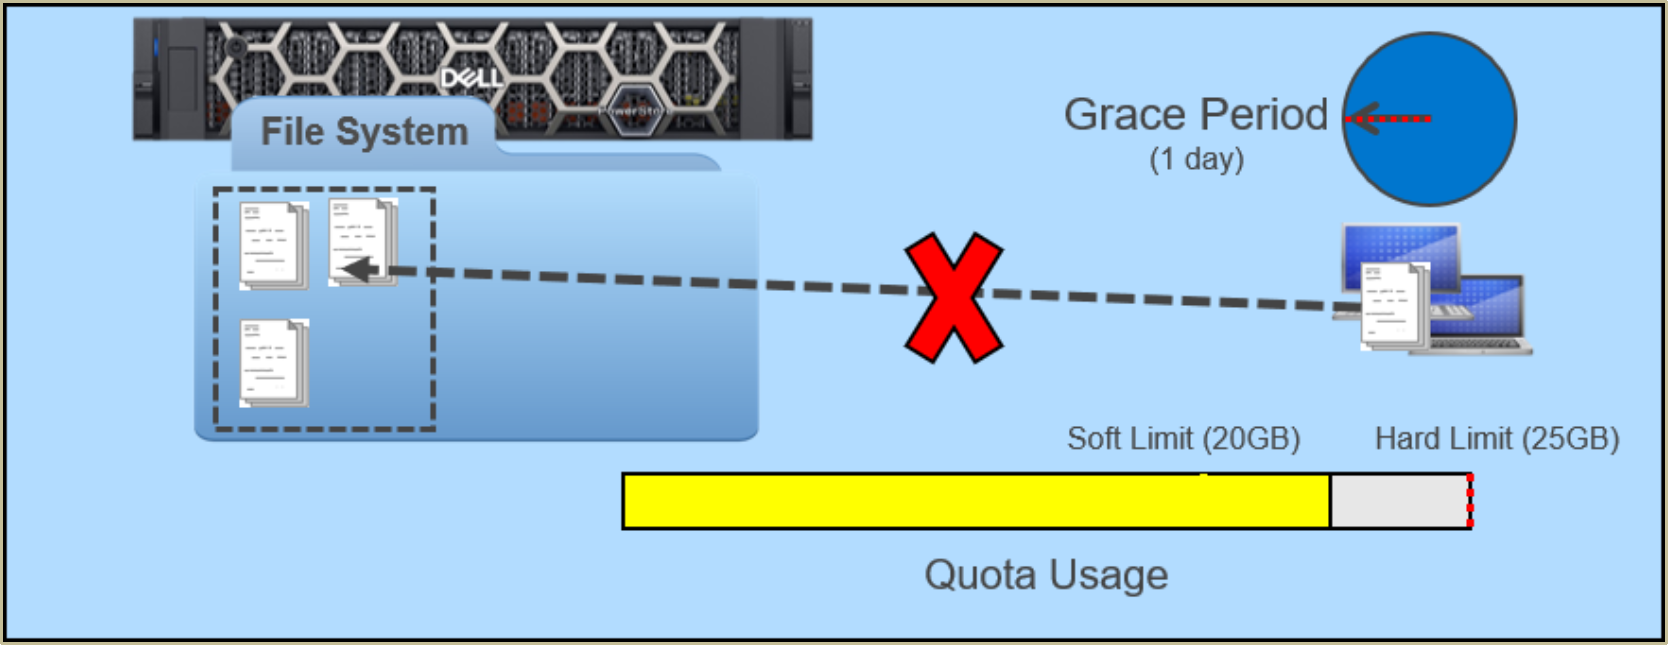 A diagram showing how a quota works after the soft limit has been reached and grace period has ended.